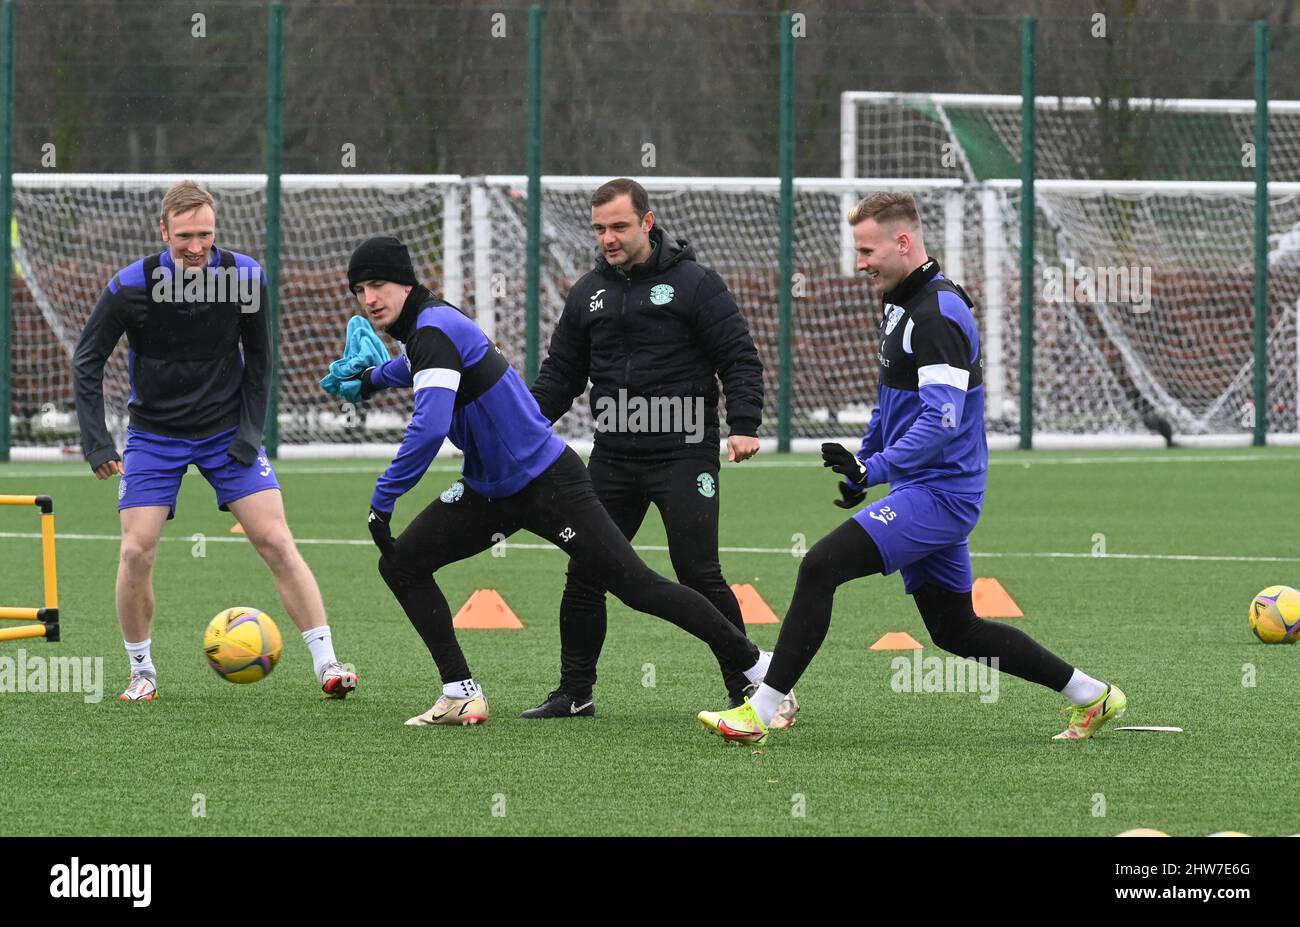 East Mains.Ormiston.Tranent.East Lothian.Scotland.UK.4th March 22 Hibs' Manager, Shaun Maloney, midfielder, Josh Campbell & forward, James Scott, during training session for Cinch Premiership match with St Johnstone Credit: eric mccowat/Alamy Live News Stock Photo